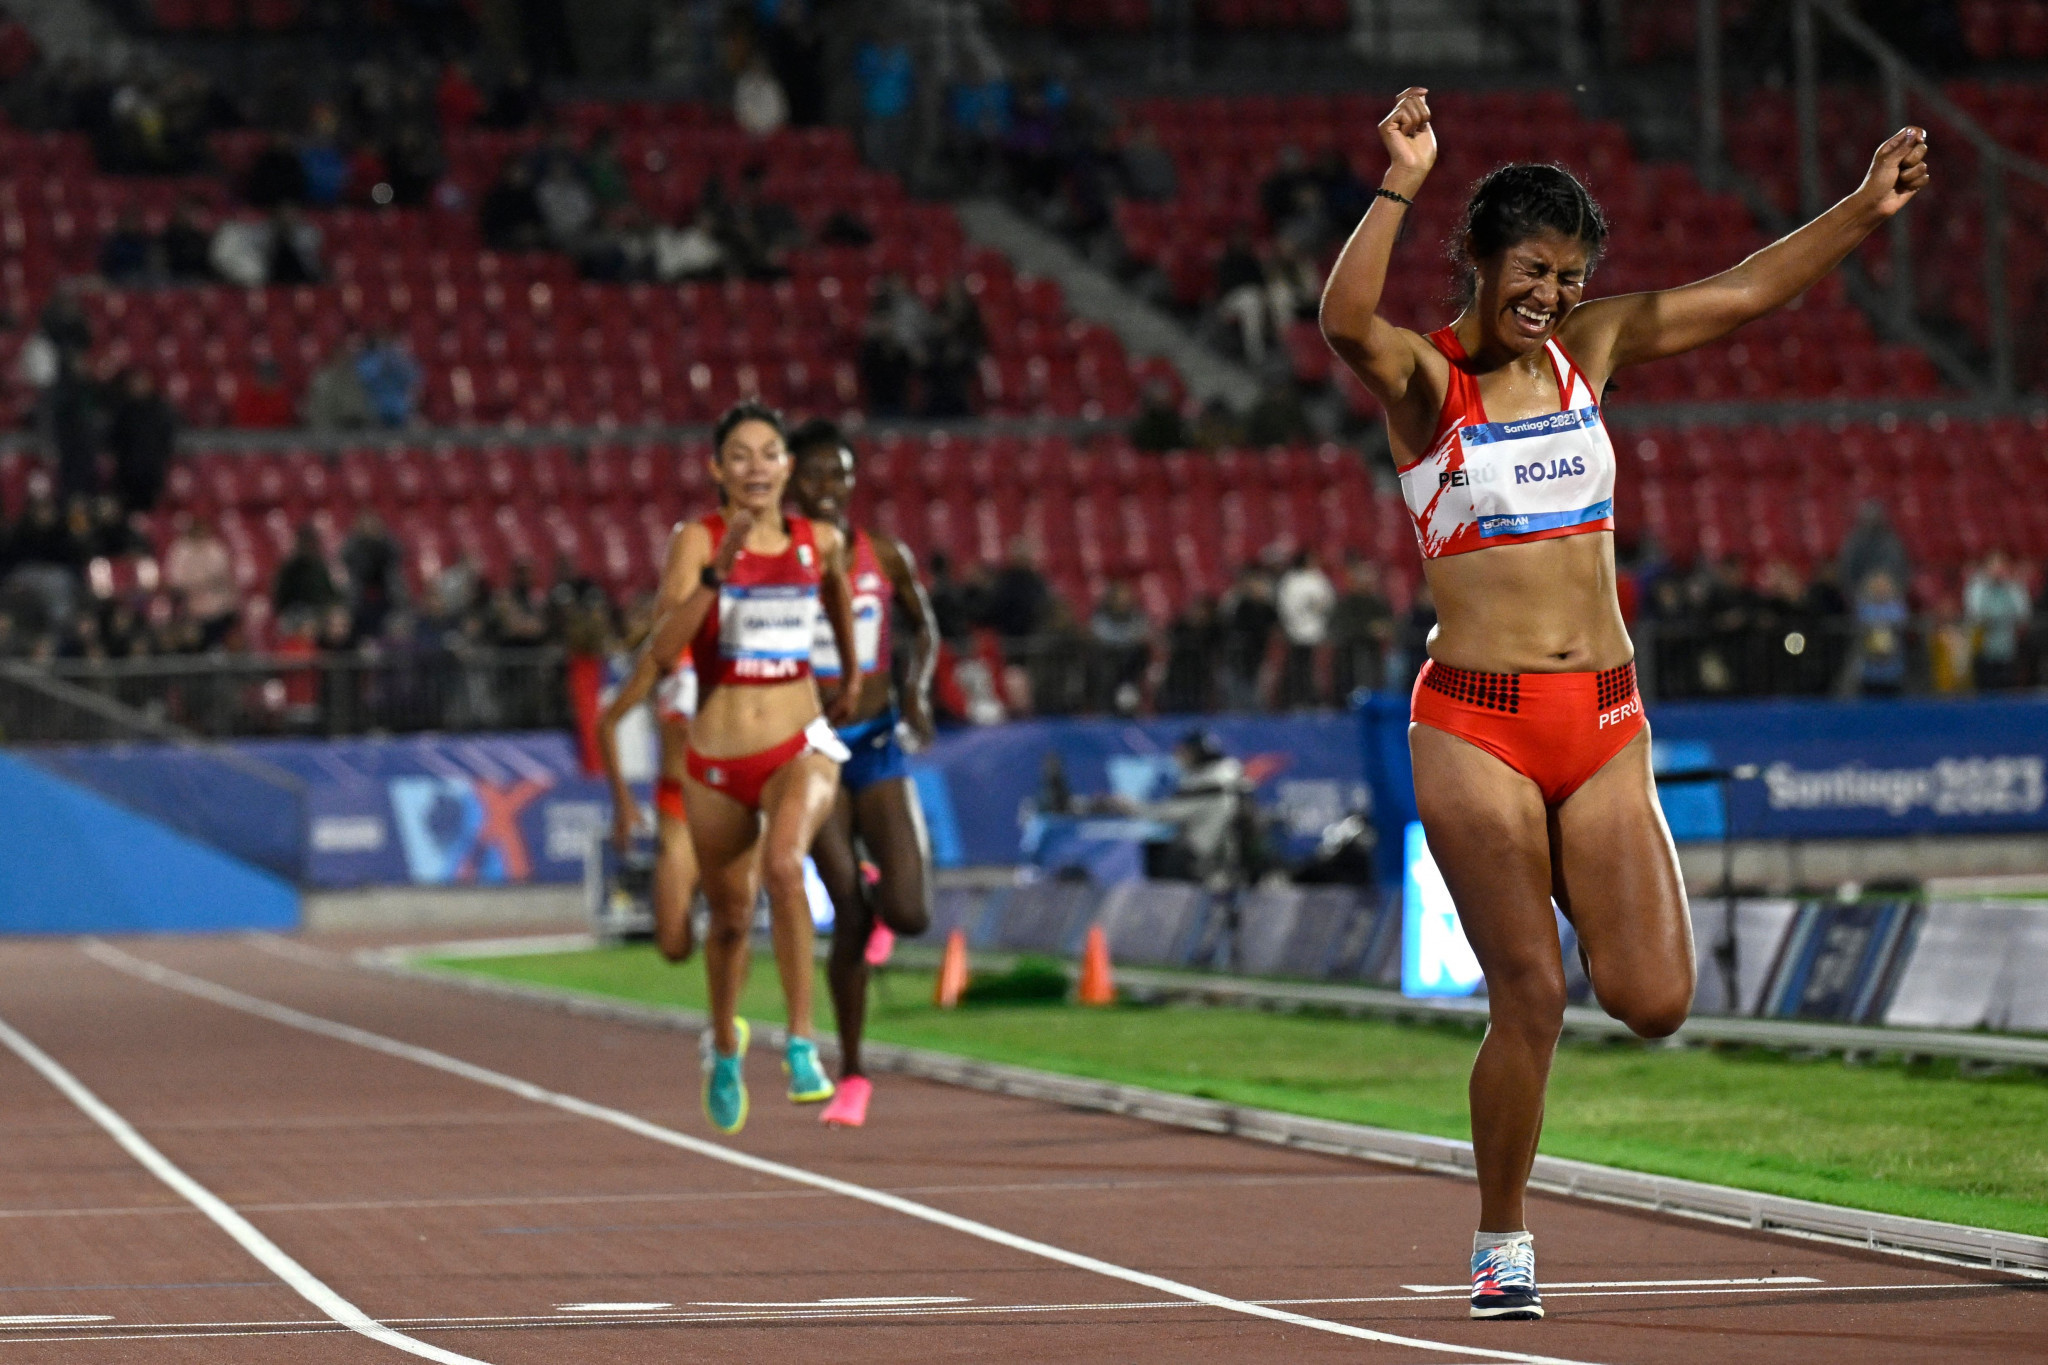 Peruvian Luz Mery Rojas emerged victorious in the women's 10,000 meters in 33min 12.99sec, helping her country to win the seventh gold medal in Santiago ©Getty Images